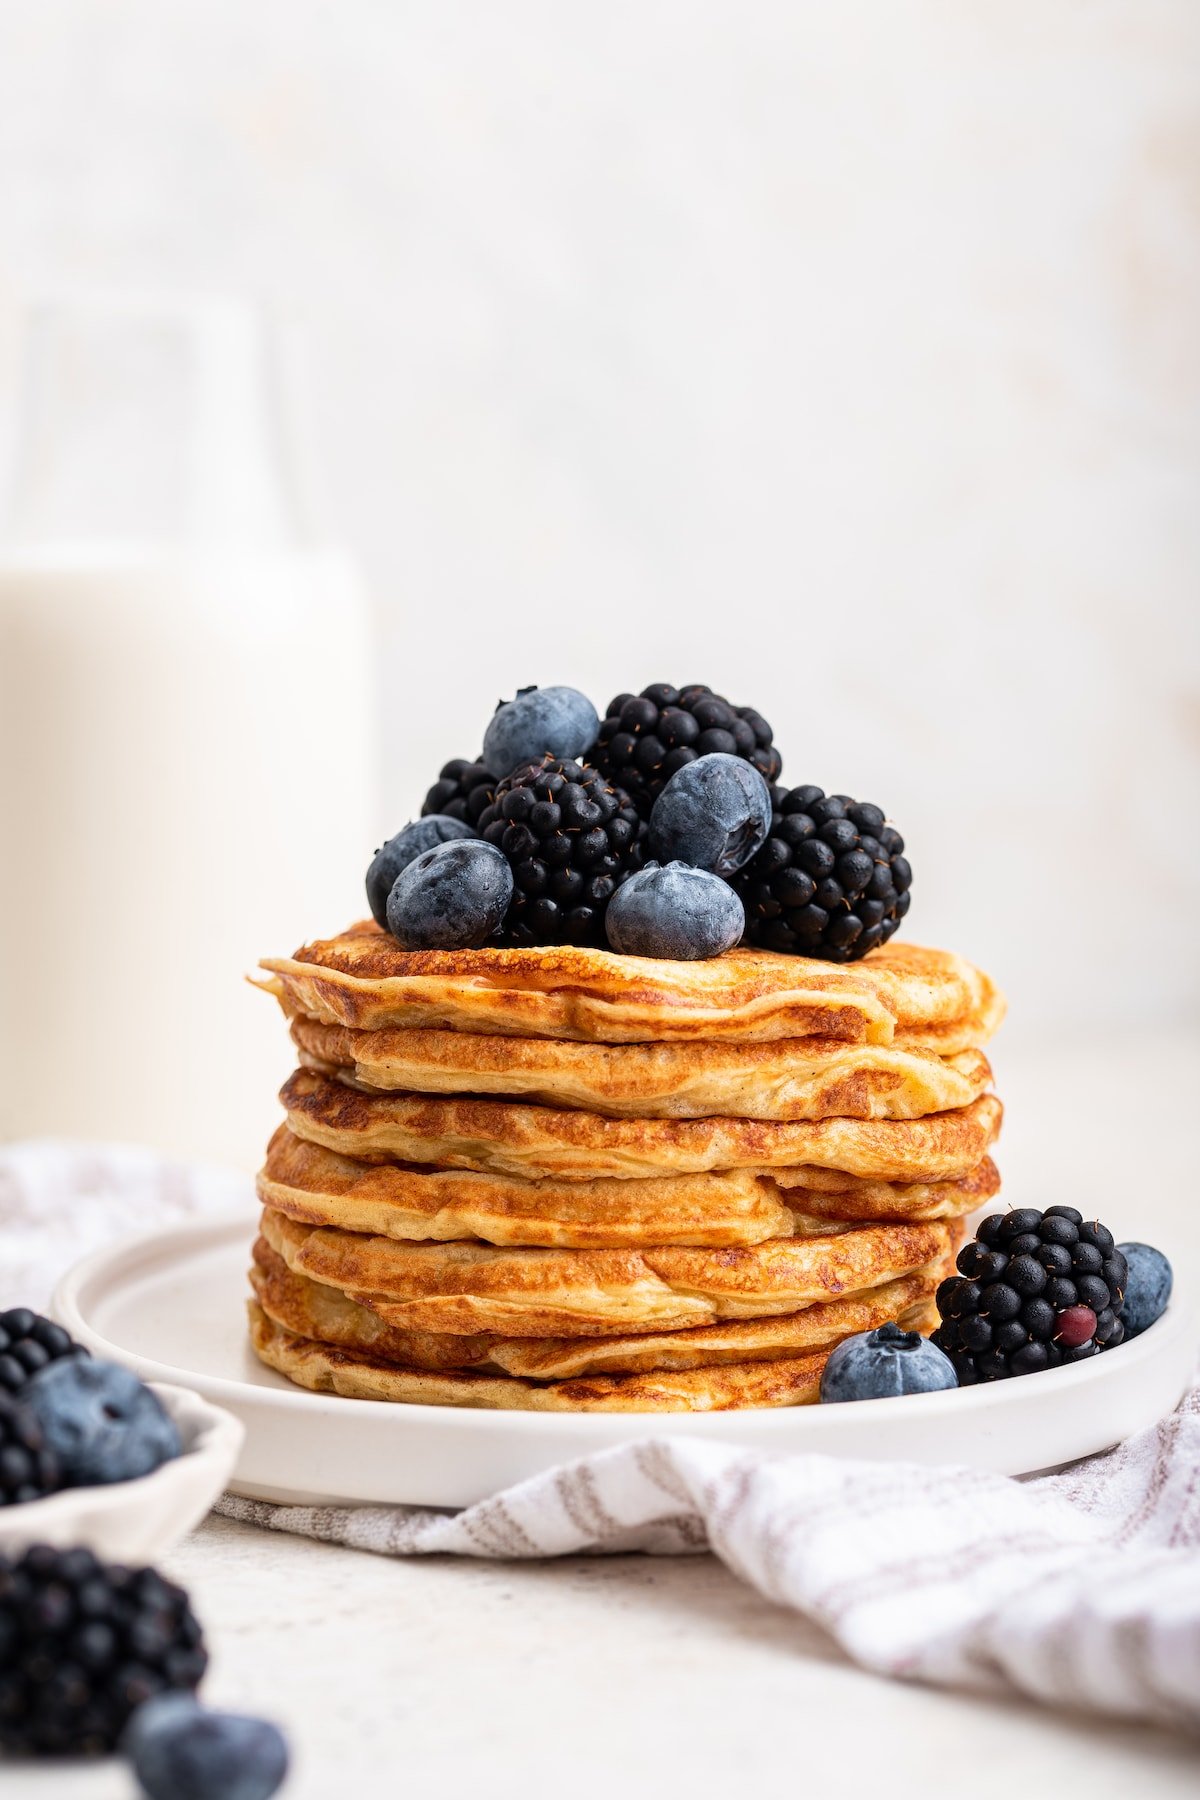 A large stack of cottage cheese pancakes on a plate topped with fresh blueberries and blackberries.